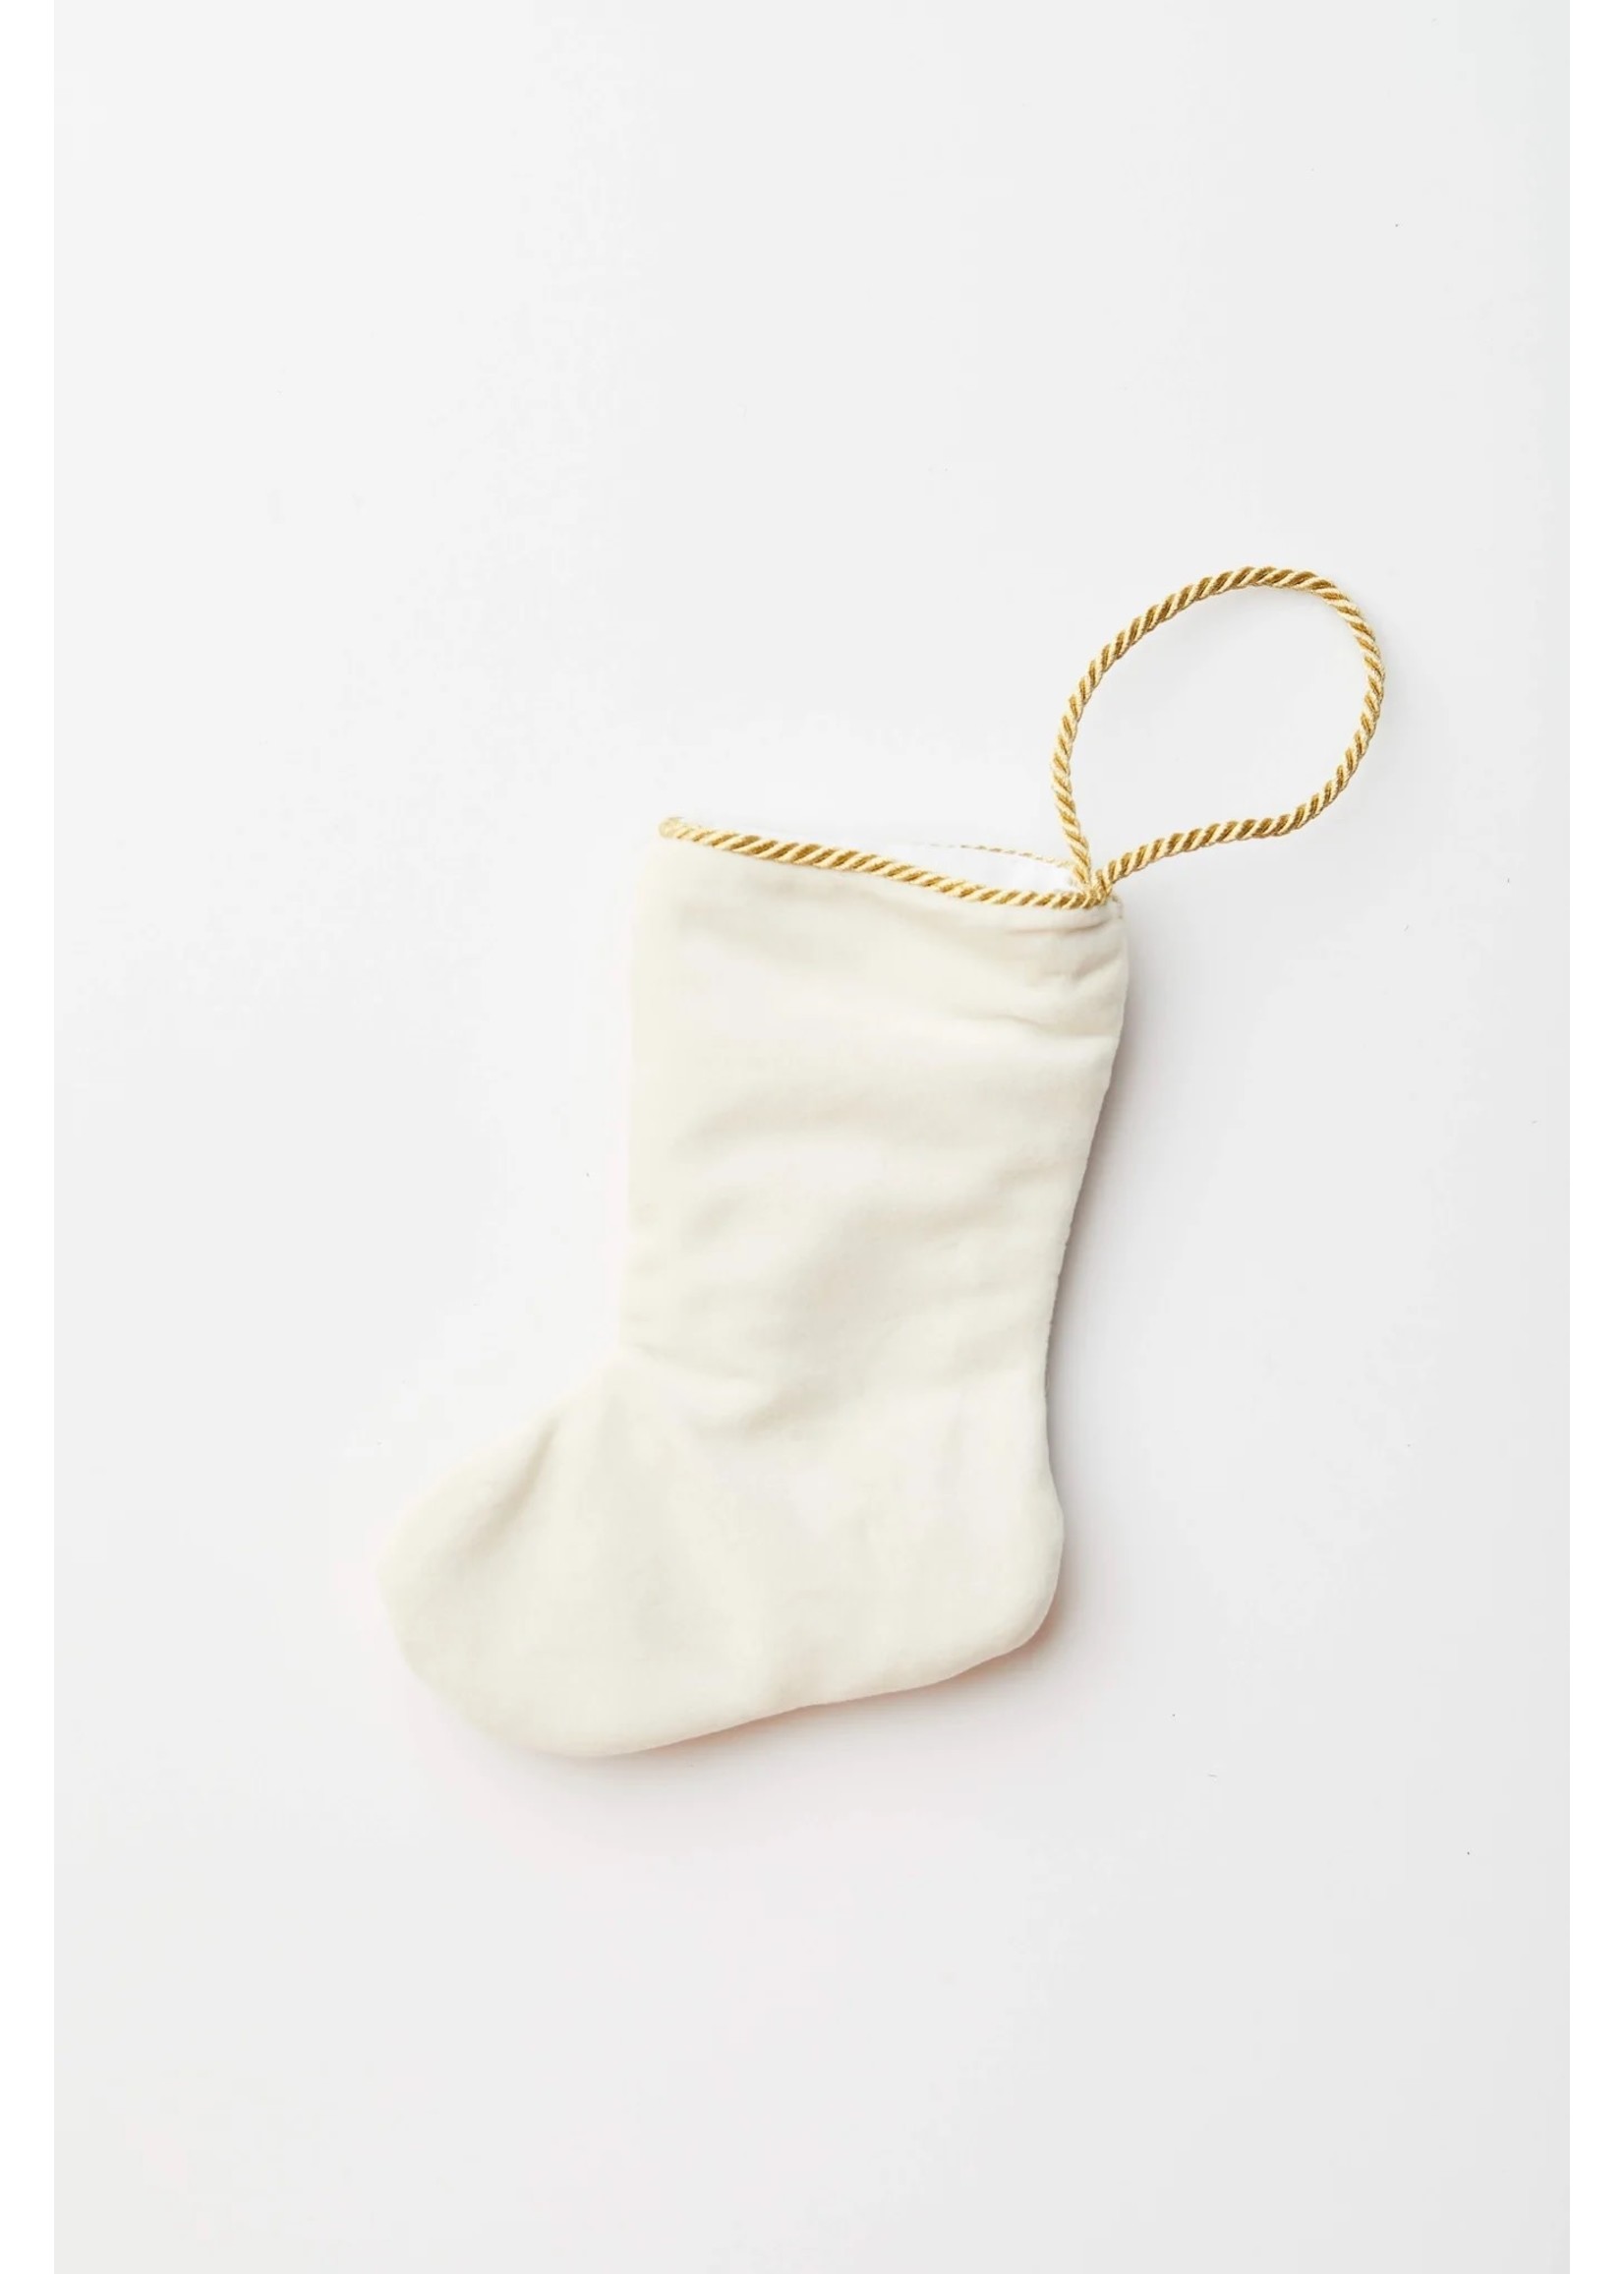 Bauble Stocking - Christmas Garland Gala by Dogwood Hill